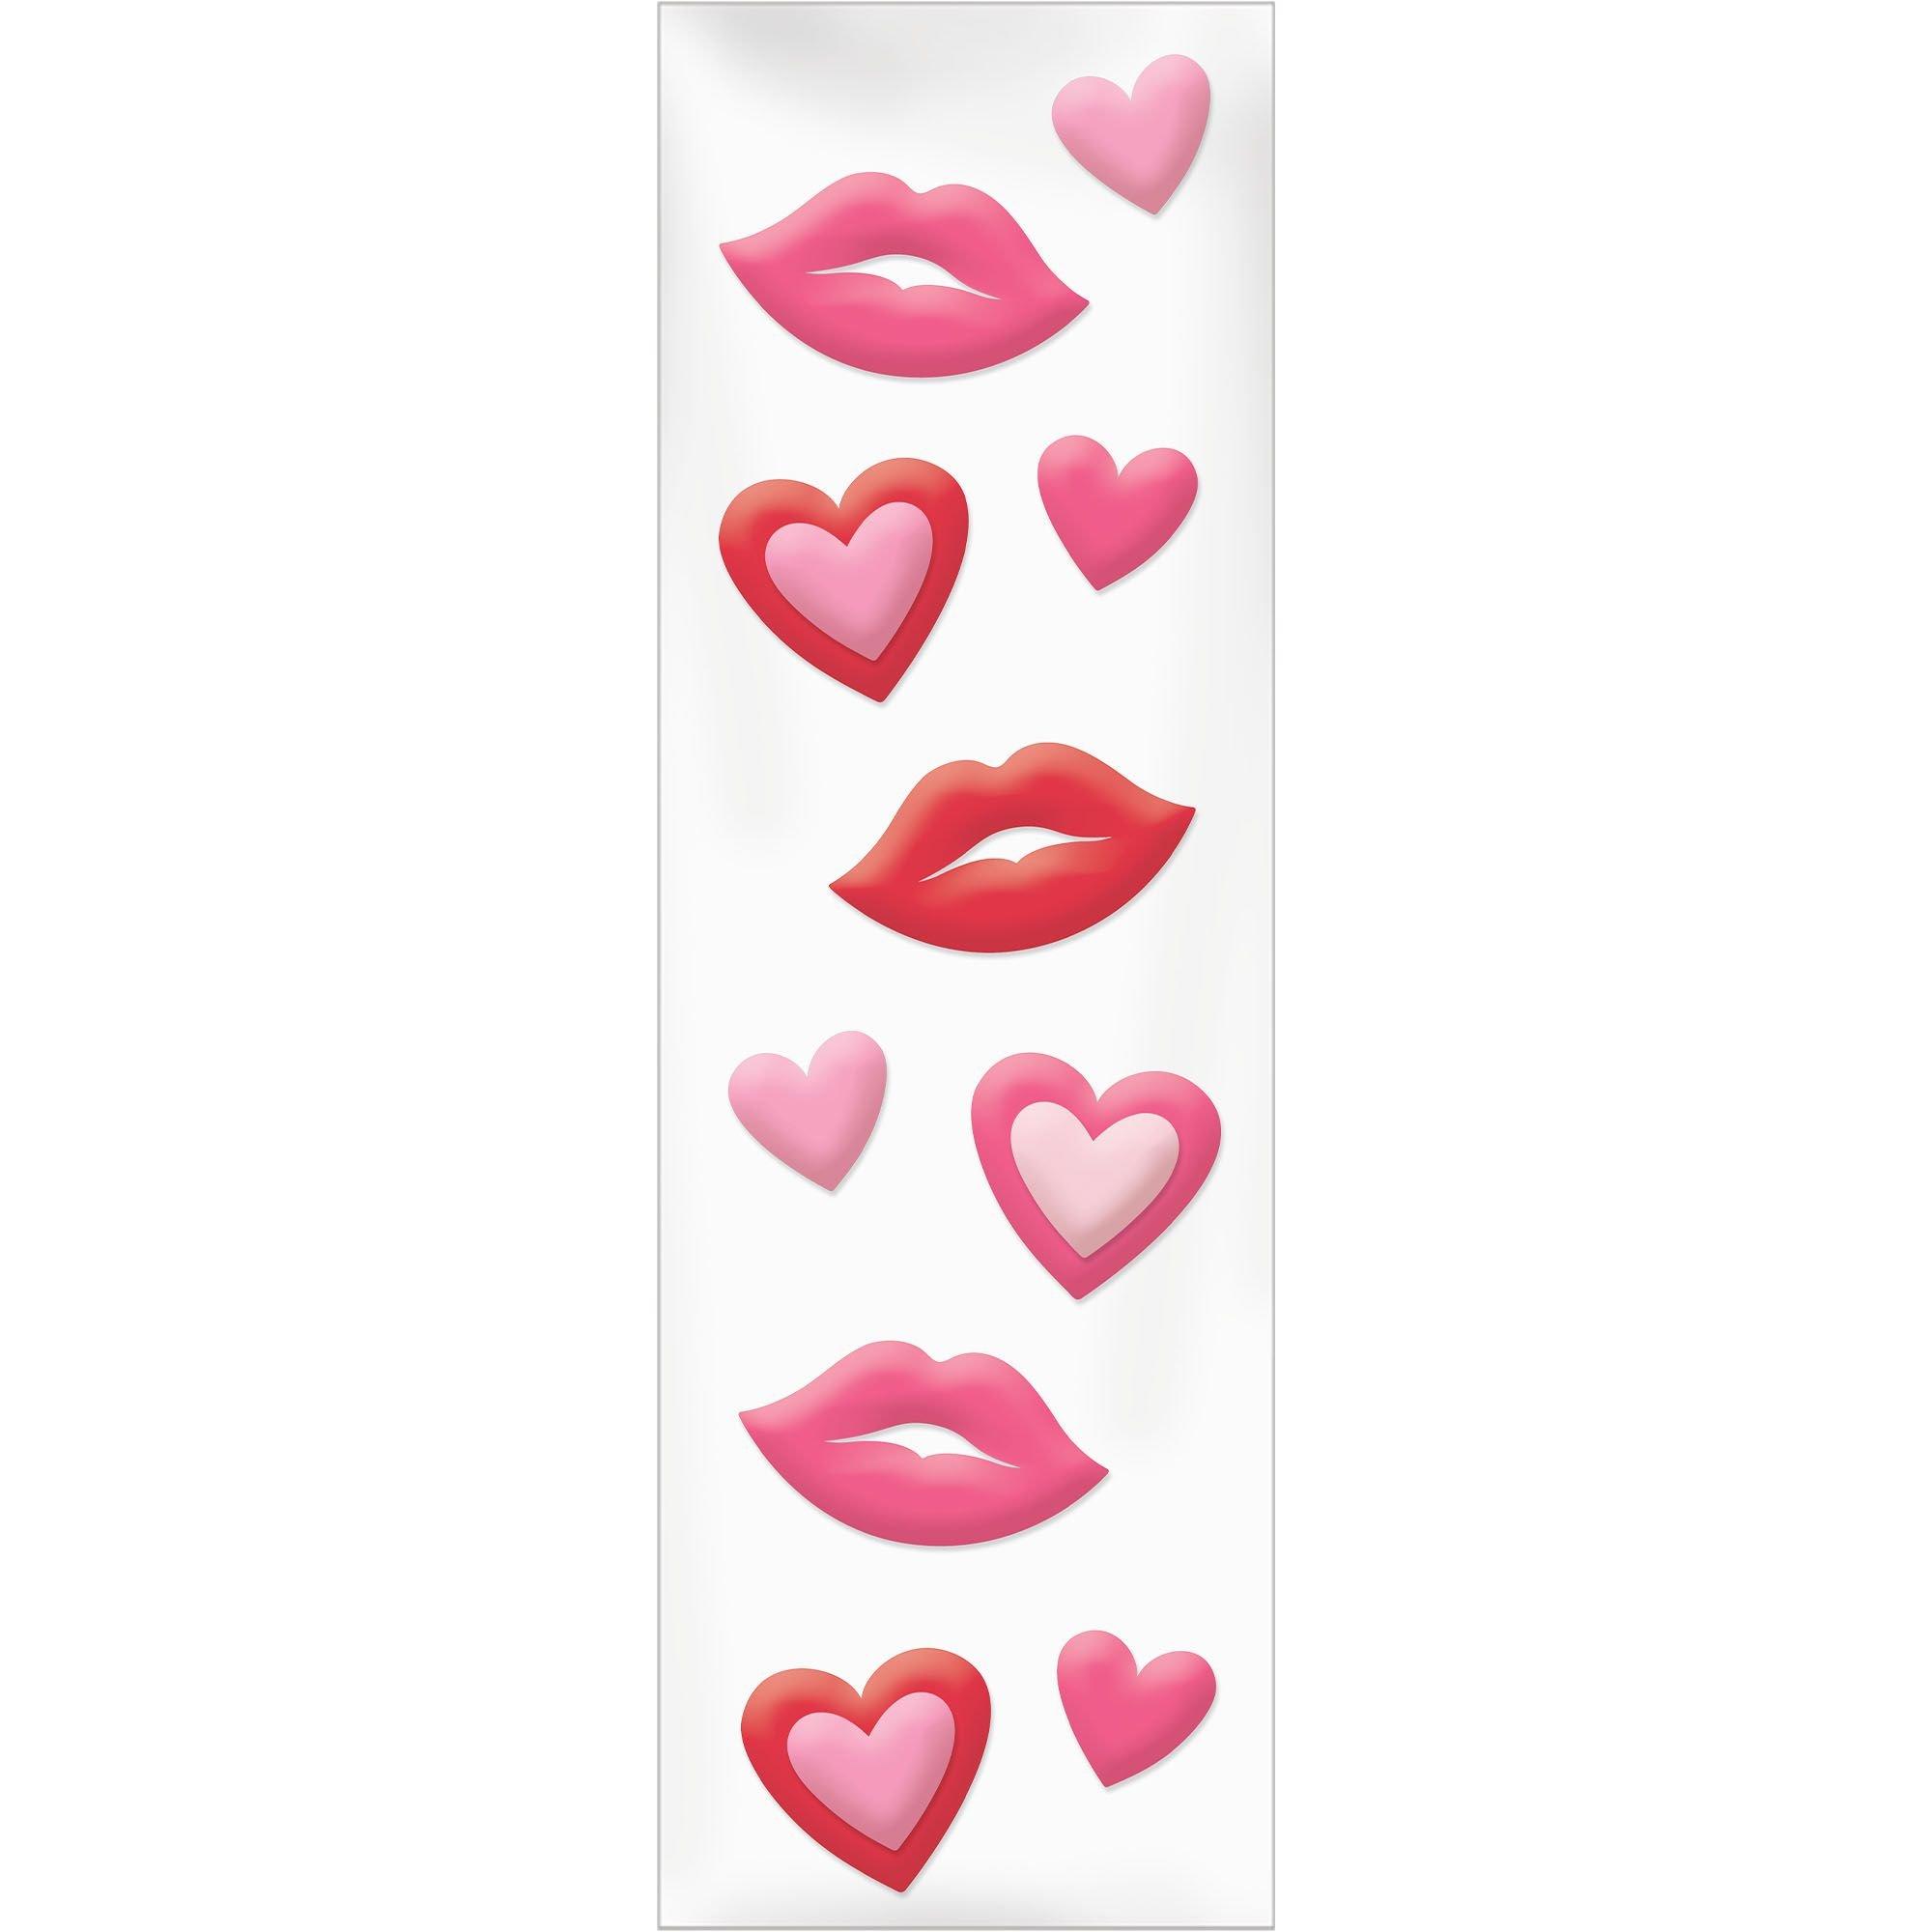 Hearts & Lips Gel Cling Decals, 10pc | Party City